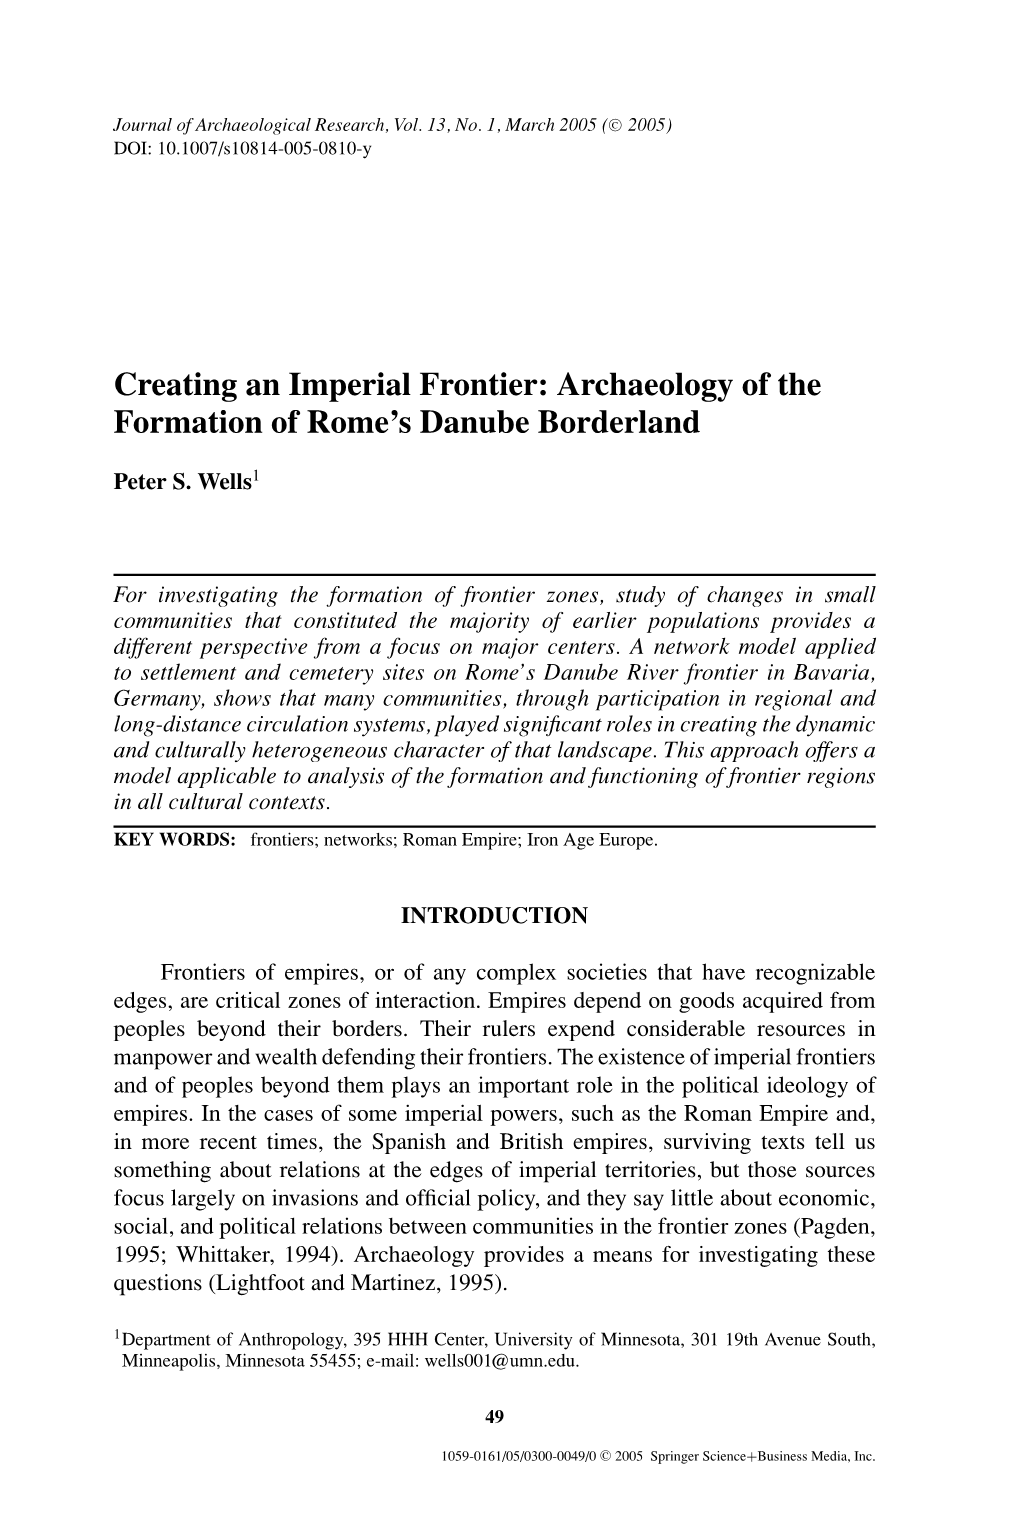 Creating an Imperial Frontier: Archaeology of the Formation of Rome's Danube Borderland